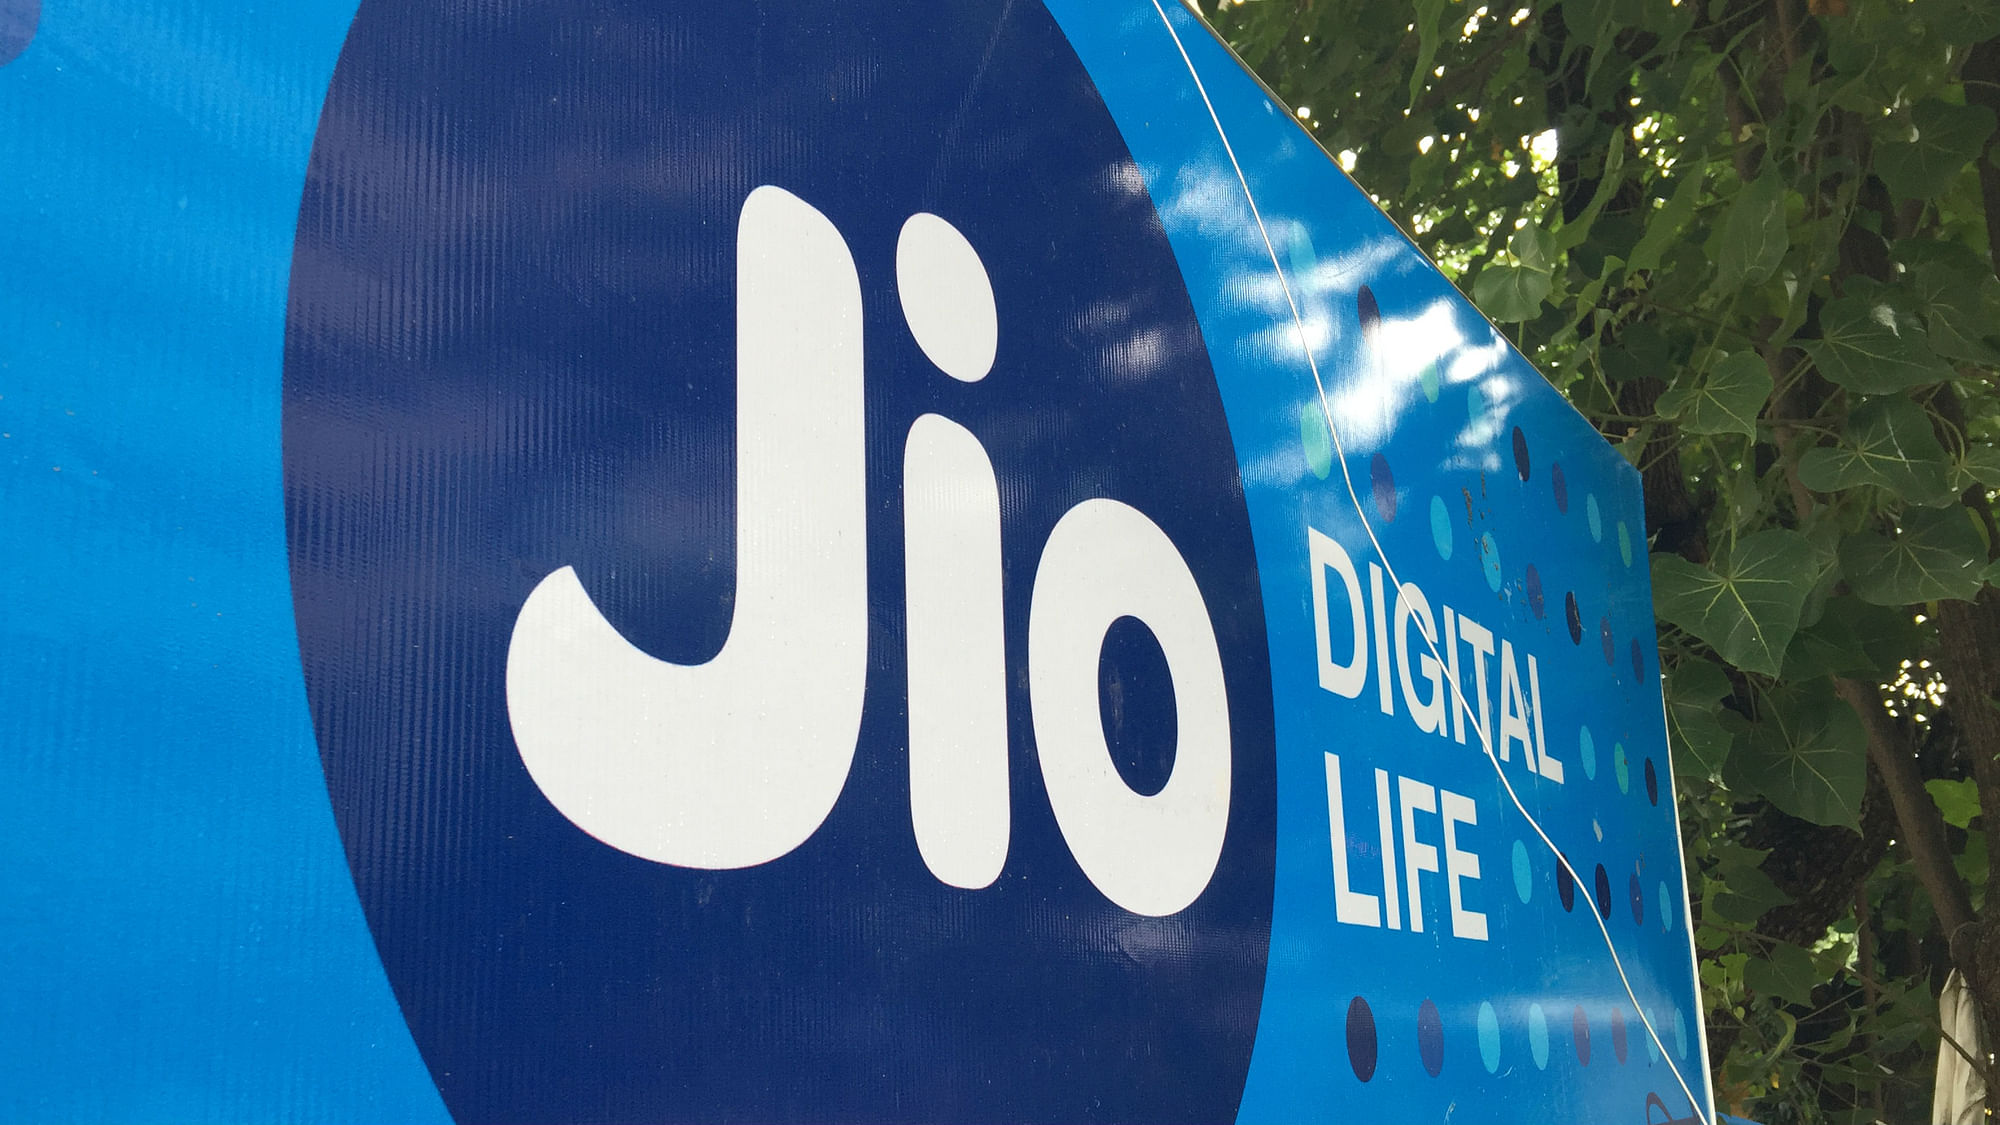 Reliance Jio 4G has over 300 million users on its network.